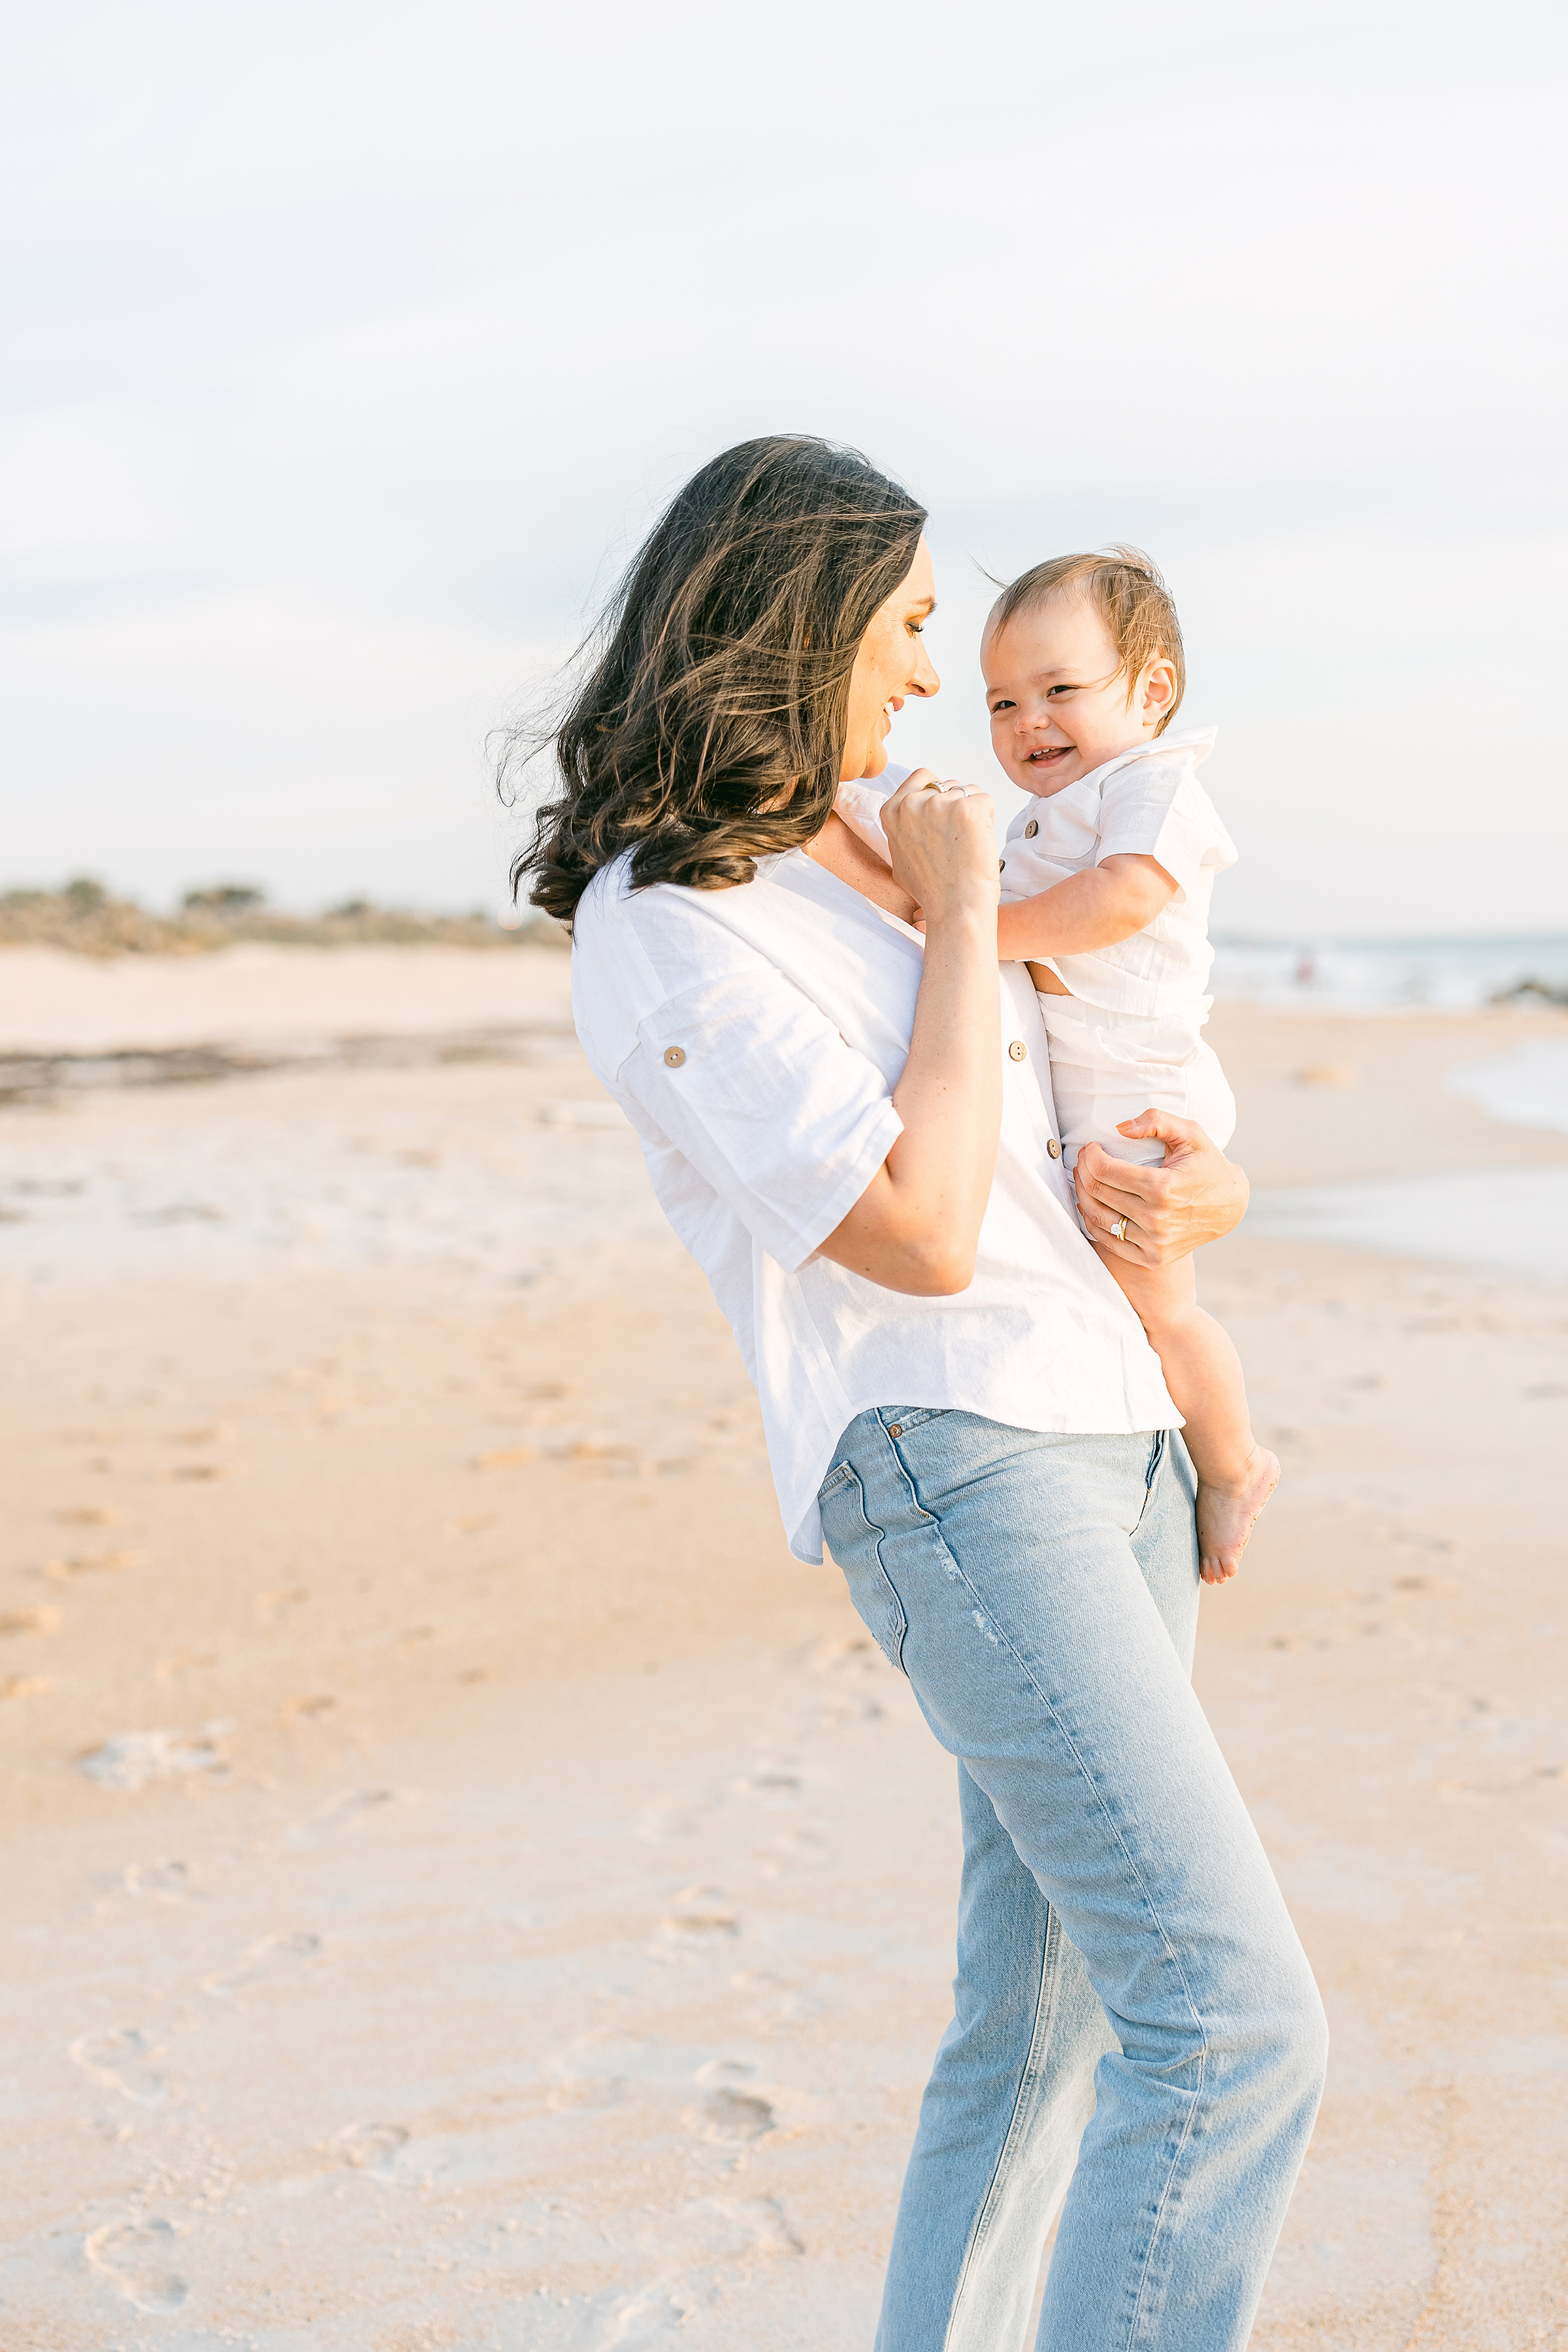 woman wearing jeans and white shirt holding baby boy on the beach at sunrise